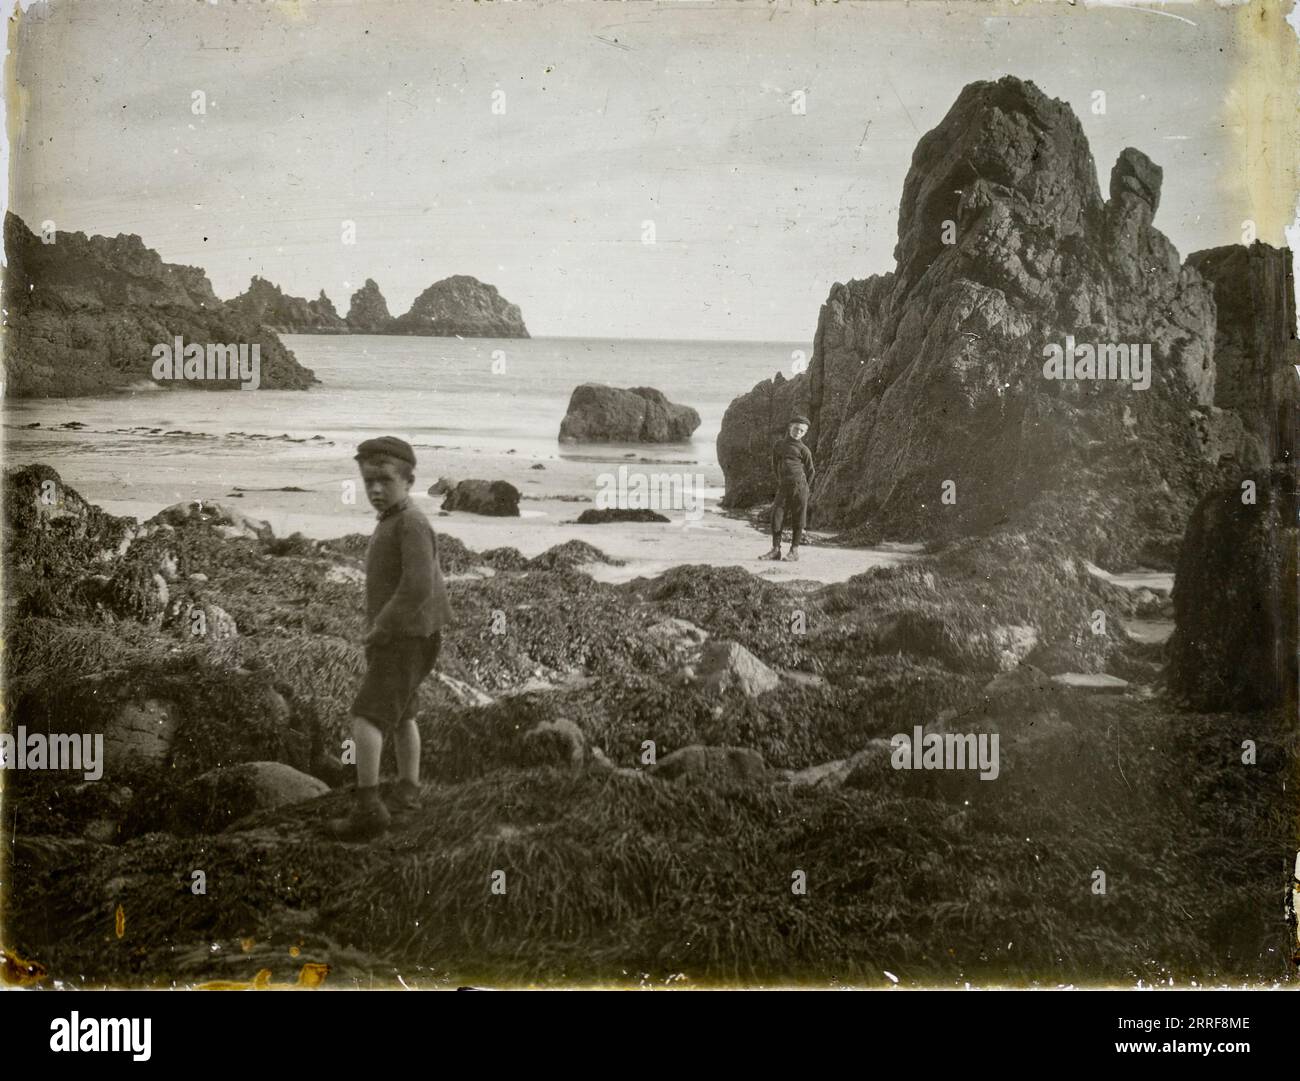 Magic lantern slide two boys playing on rocky beach circa 1900 location not known, presumed to be England, UK perhaps Cornwall Stock Photo